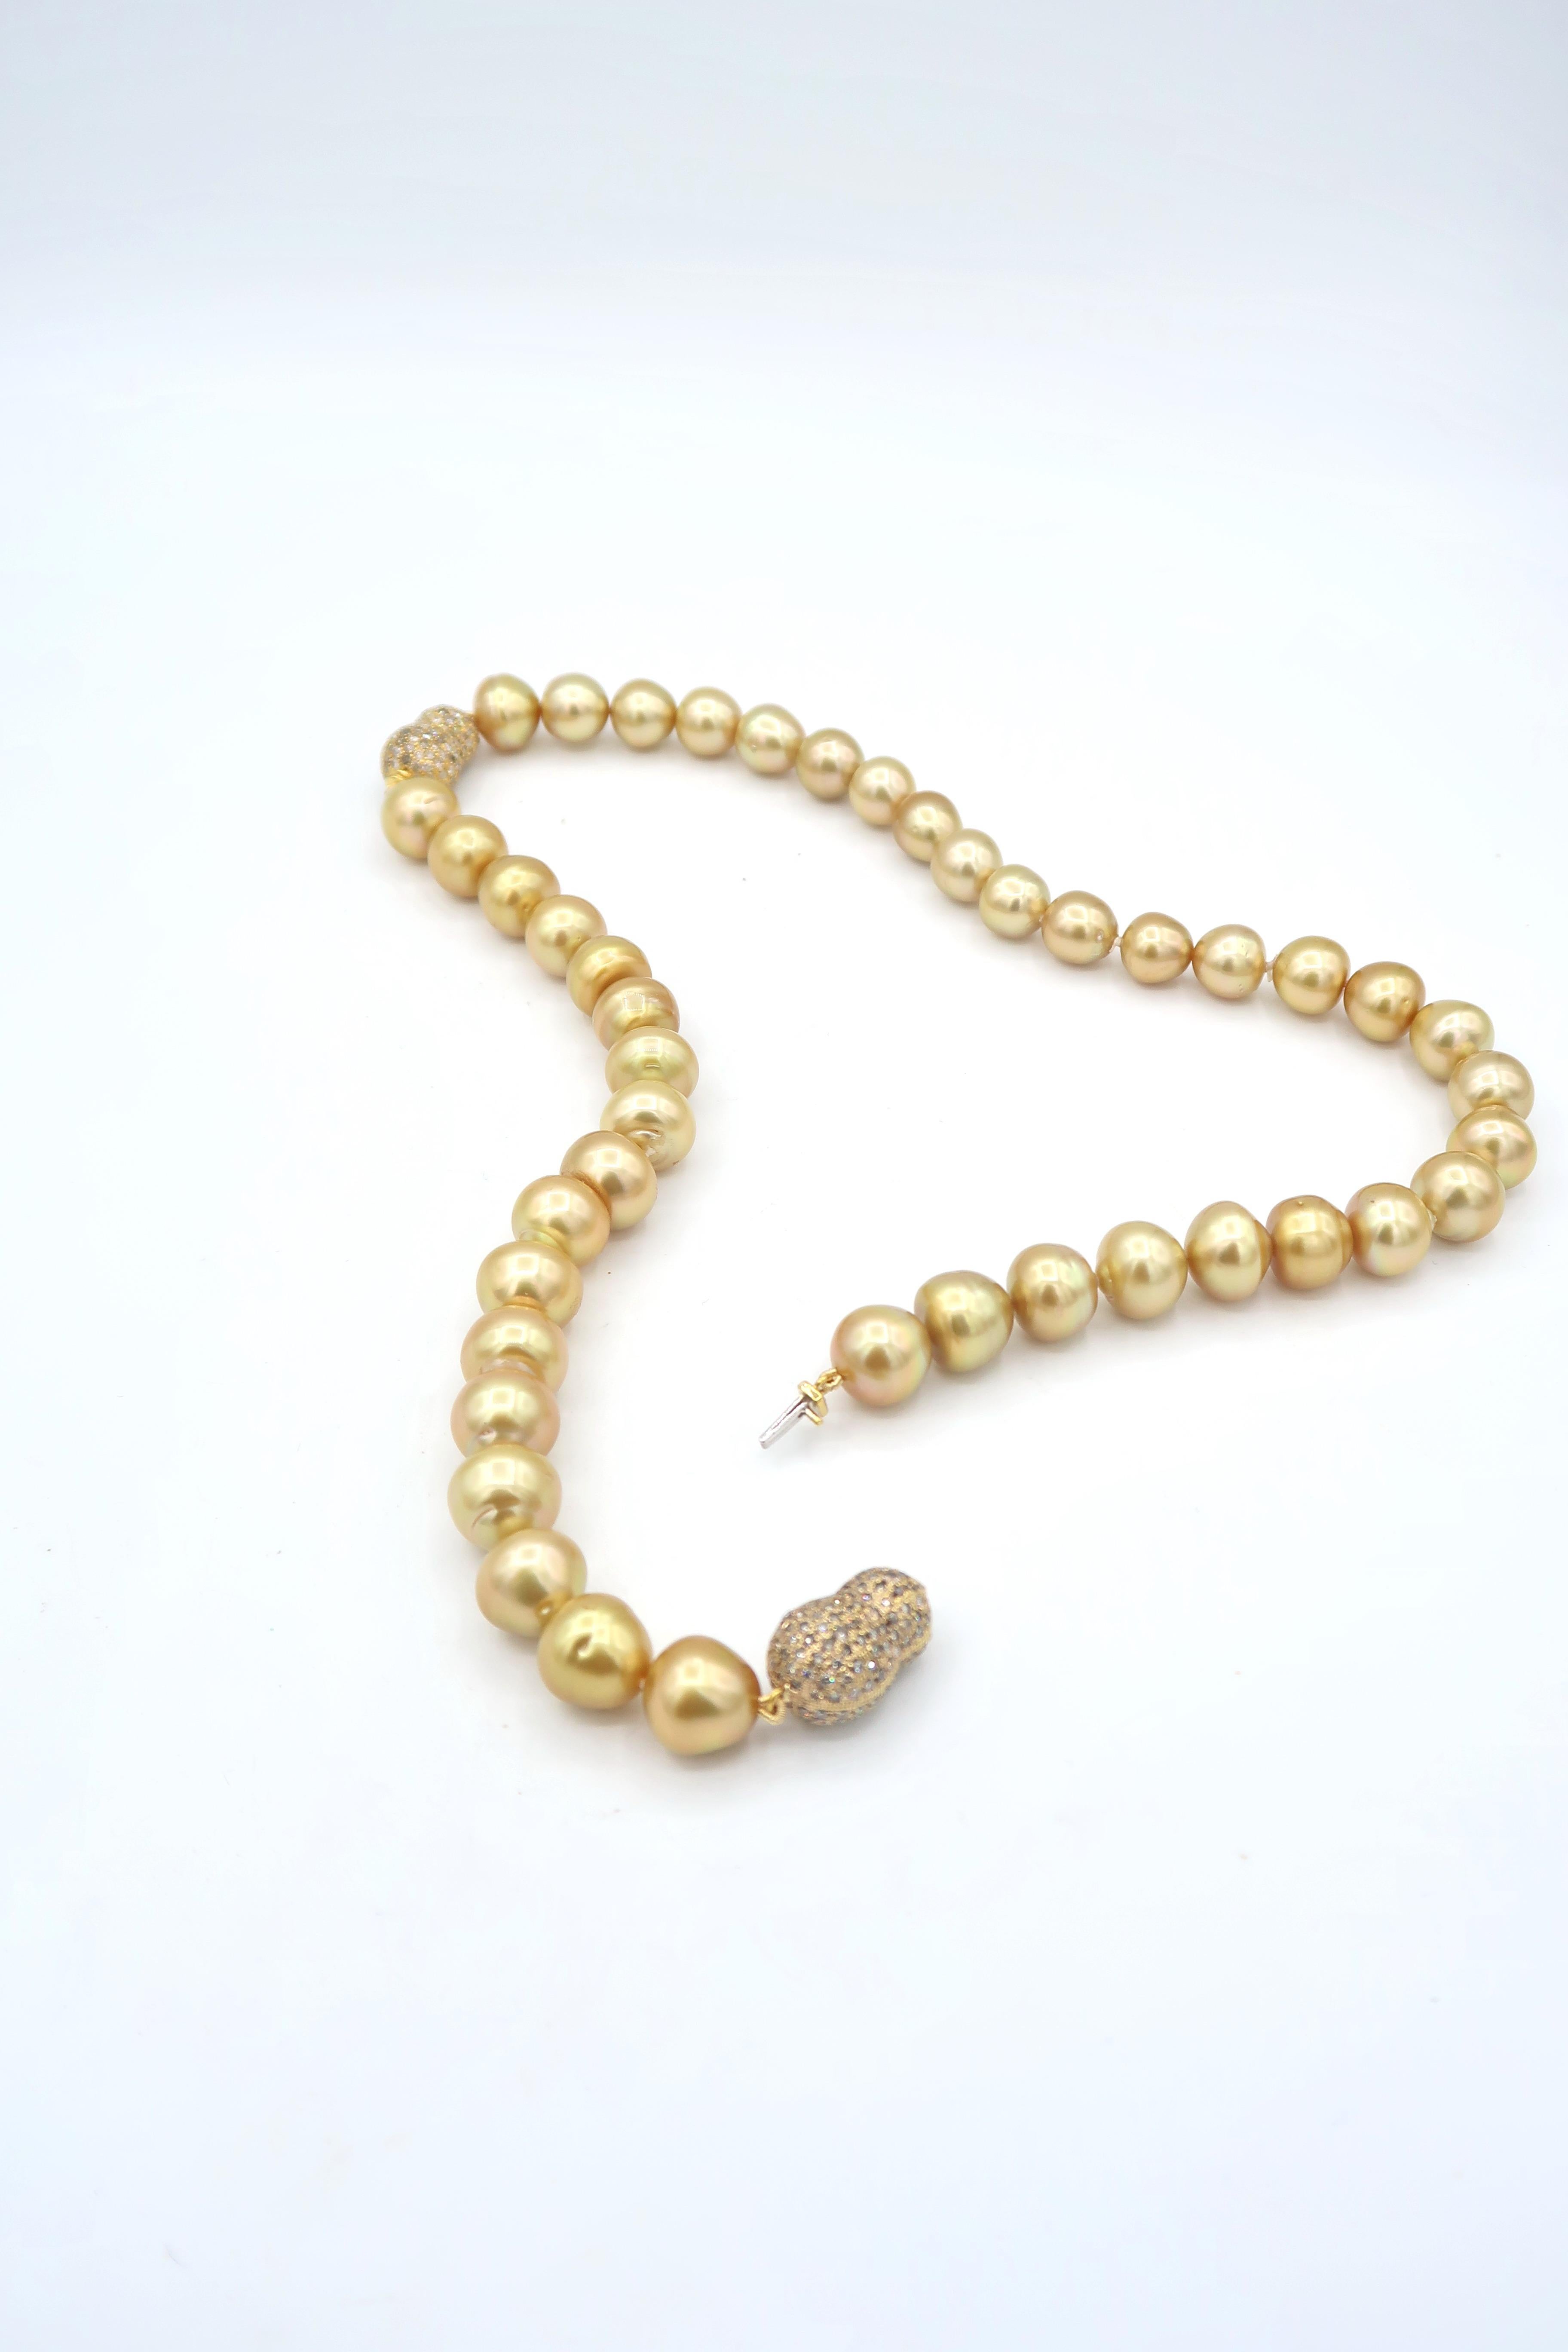 Round Cut Deep Gold South Sea Pearl Necklace and Champagne Diamond Peanut Gold Clasp For Sale